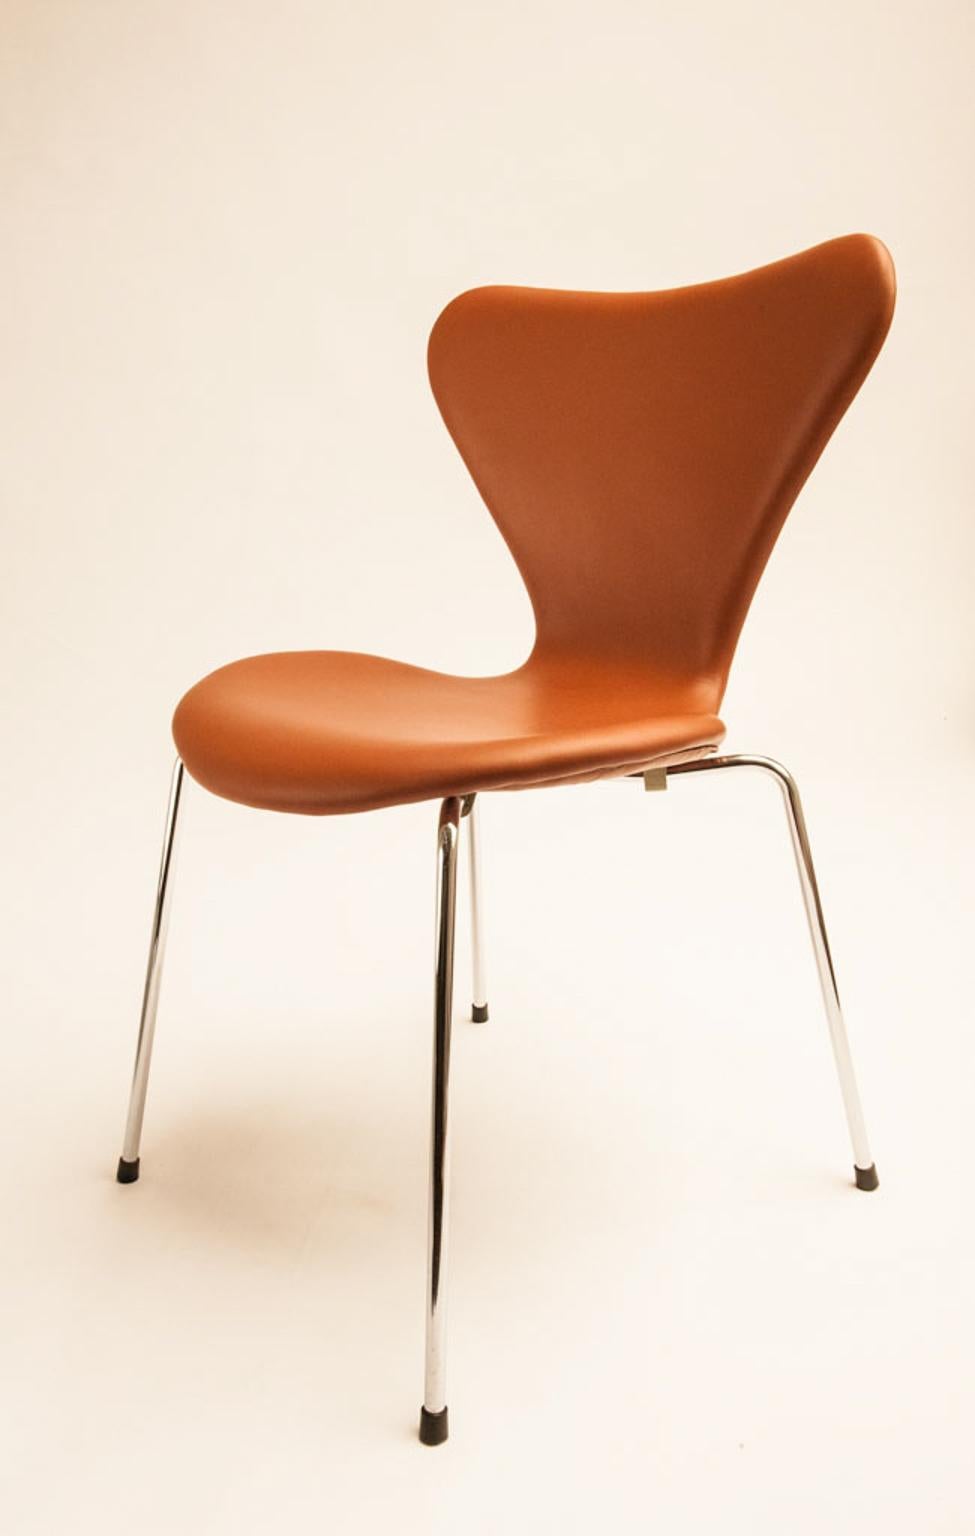 Seven chair, model 3107. Set of six chairs in molded plywood shell, with chromed tubular steel frame. Designed in 1955. Manufactured by Fritz Hansen. Professionally reupholstered in cognac-colored semi-aniline leather from Arne